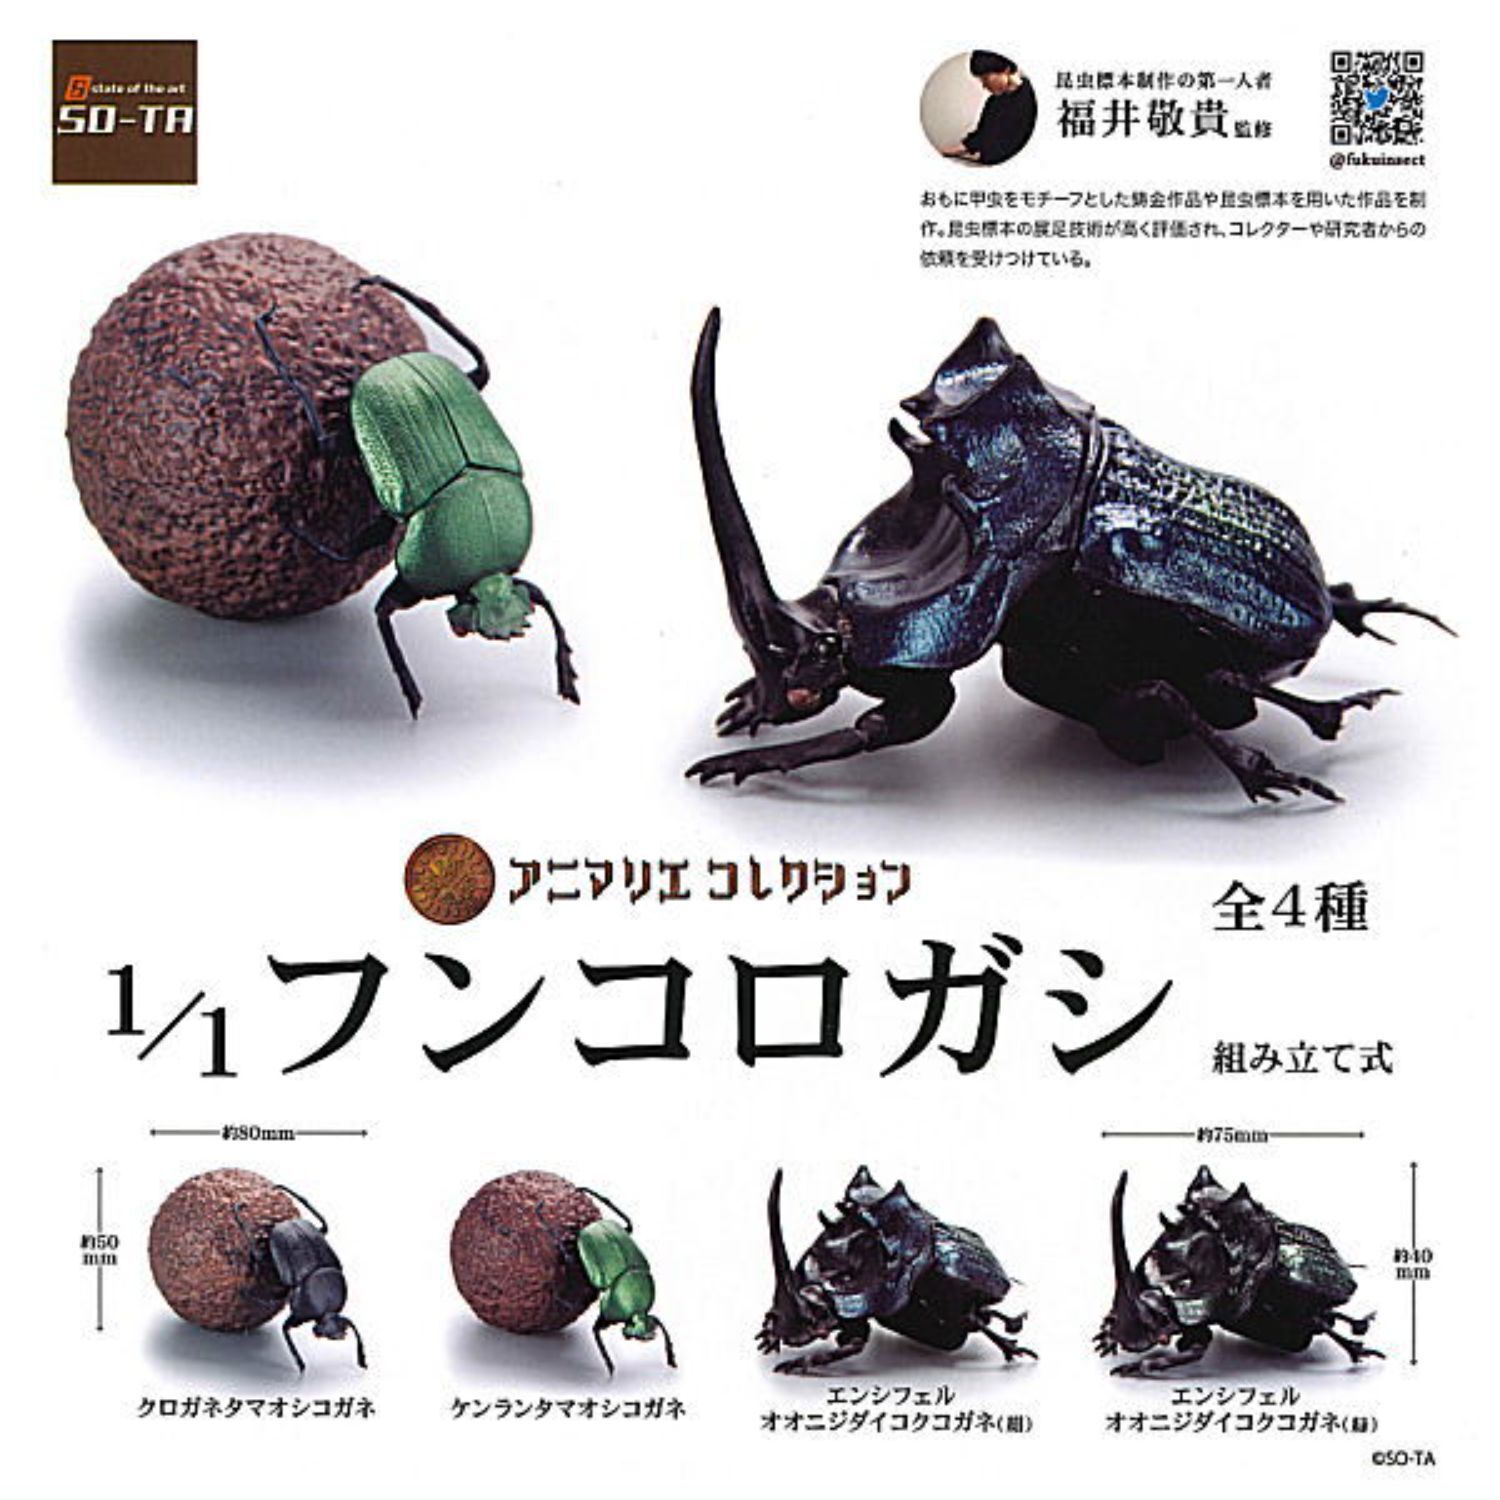 Animalier Collection Dung Beetle Mascot Capsule Toy 4 Types Full Comp Set Gacha